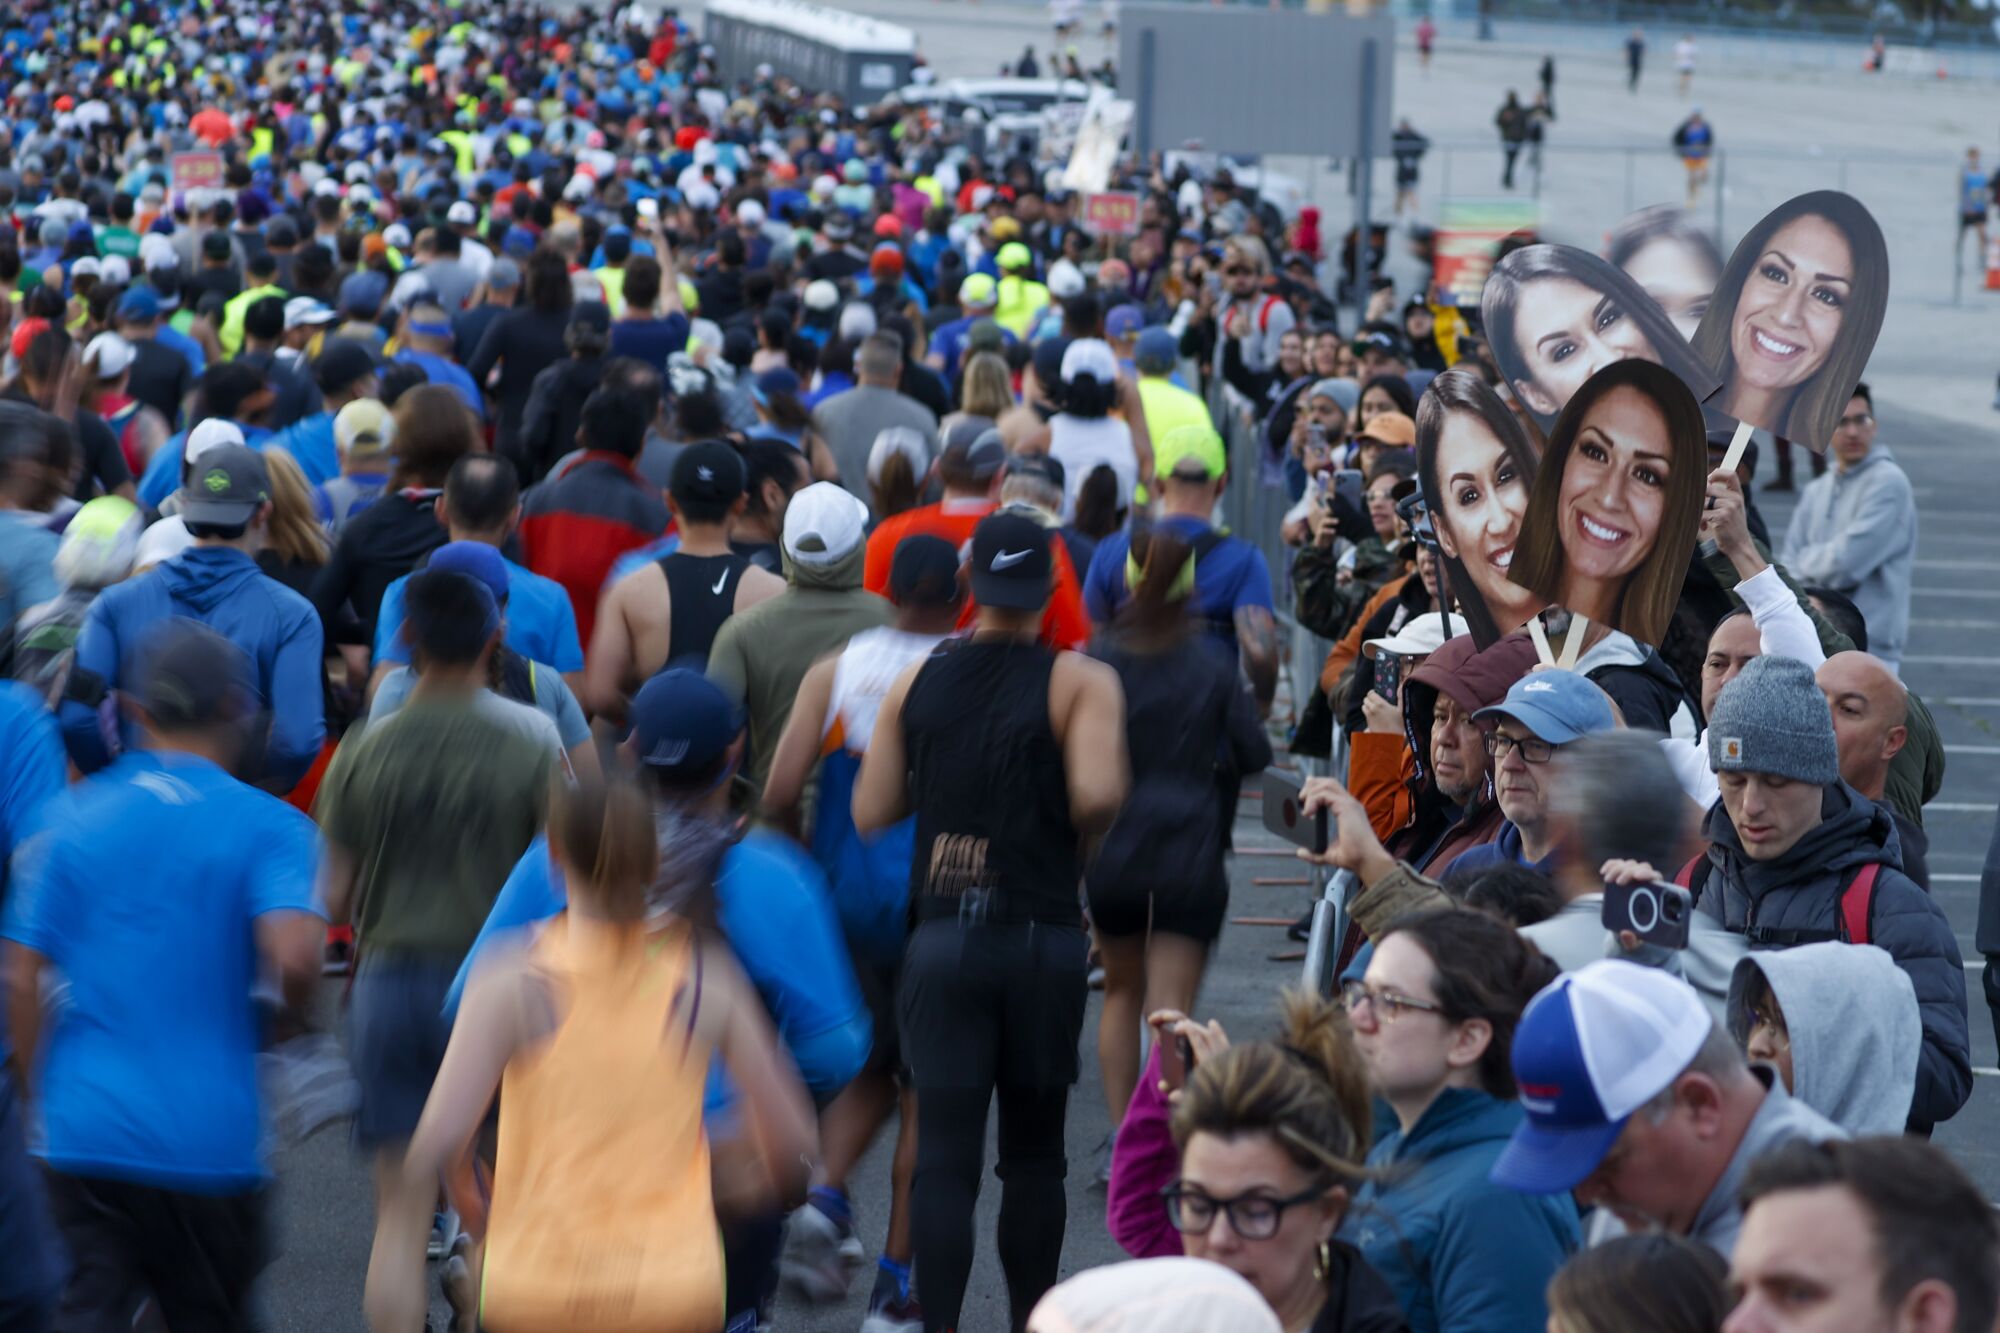 Marathon runners pass spectators, including one holding cardboard cutouts of a runner's face